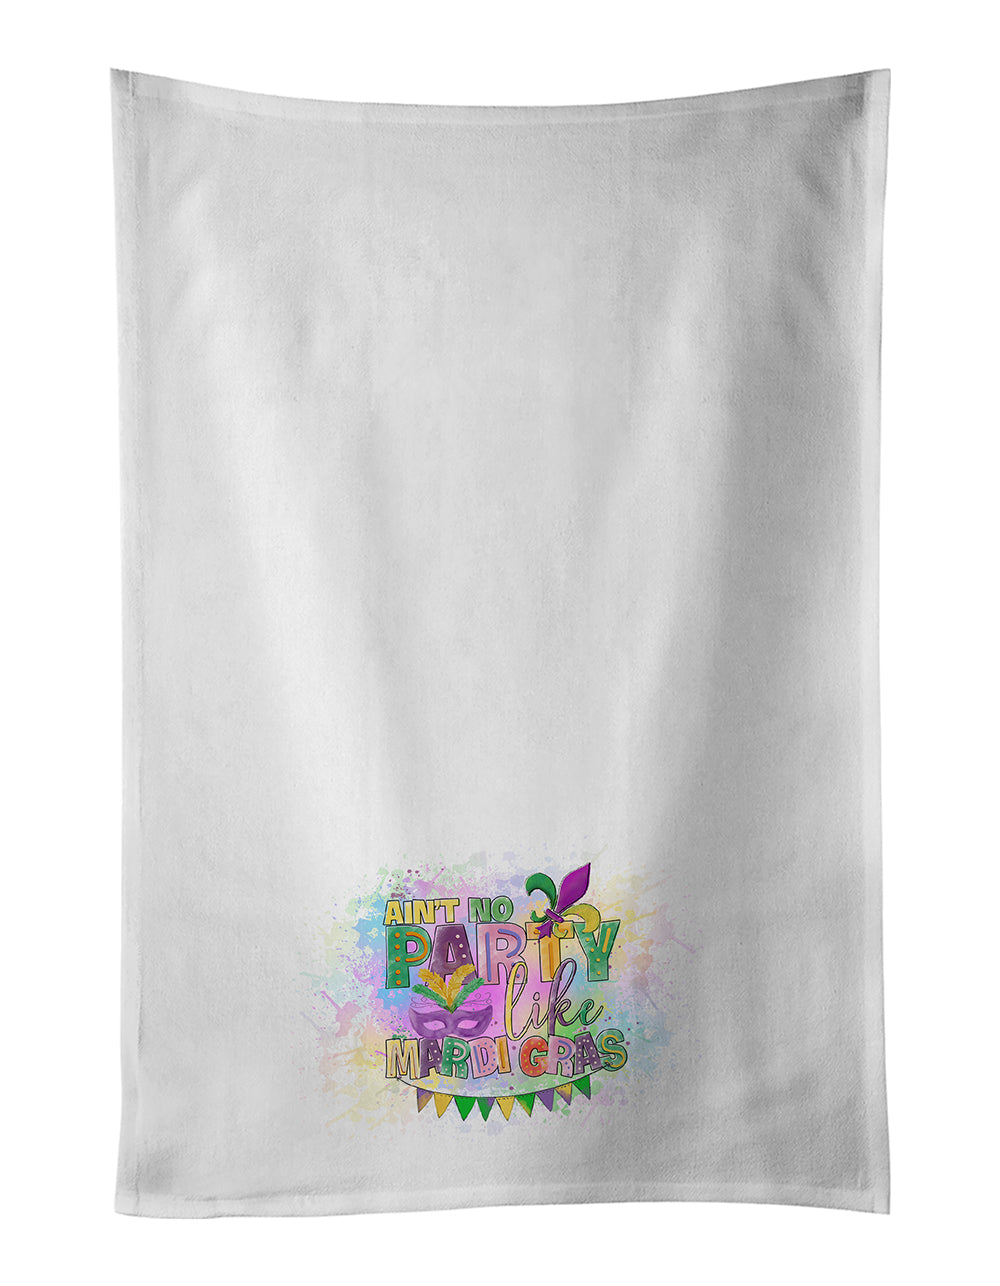 Buy this Ain't No Party Like Mardi Gras White Kitchen Towel Set of 2 Dish Towels